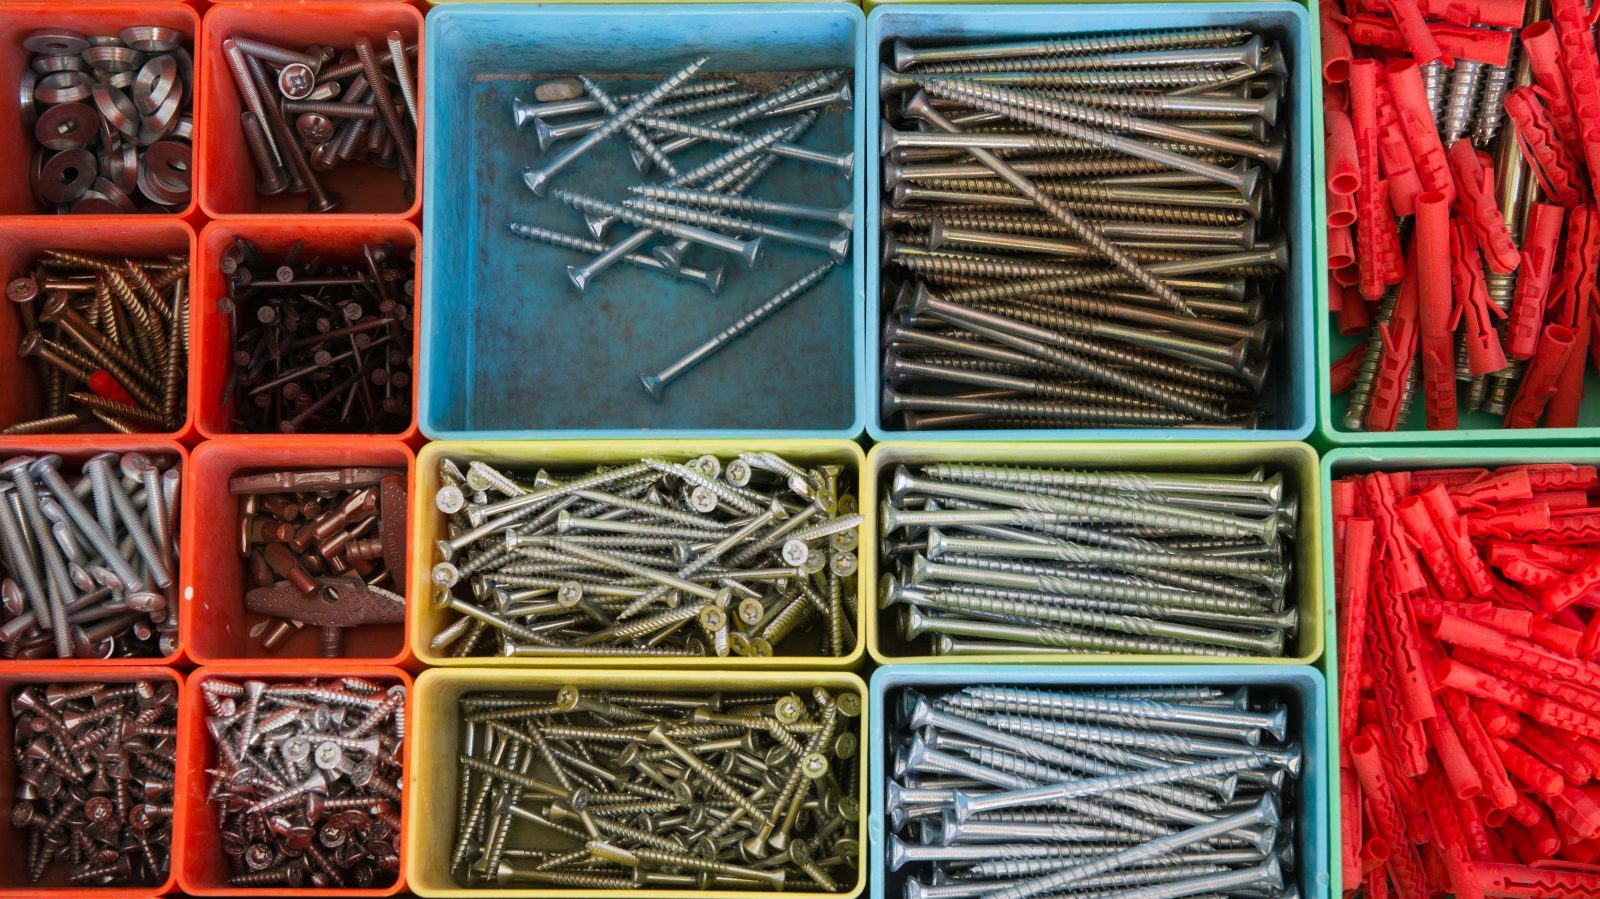 Guide to Choosing the Best Nails and Screws for Cladding